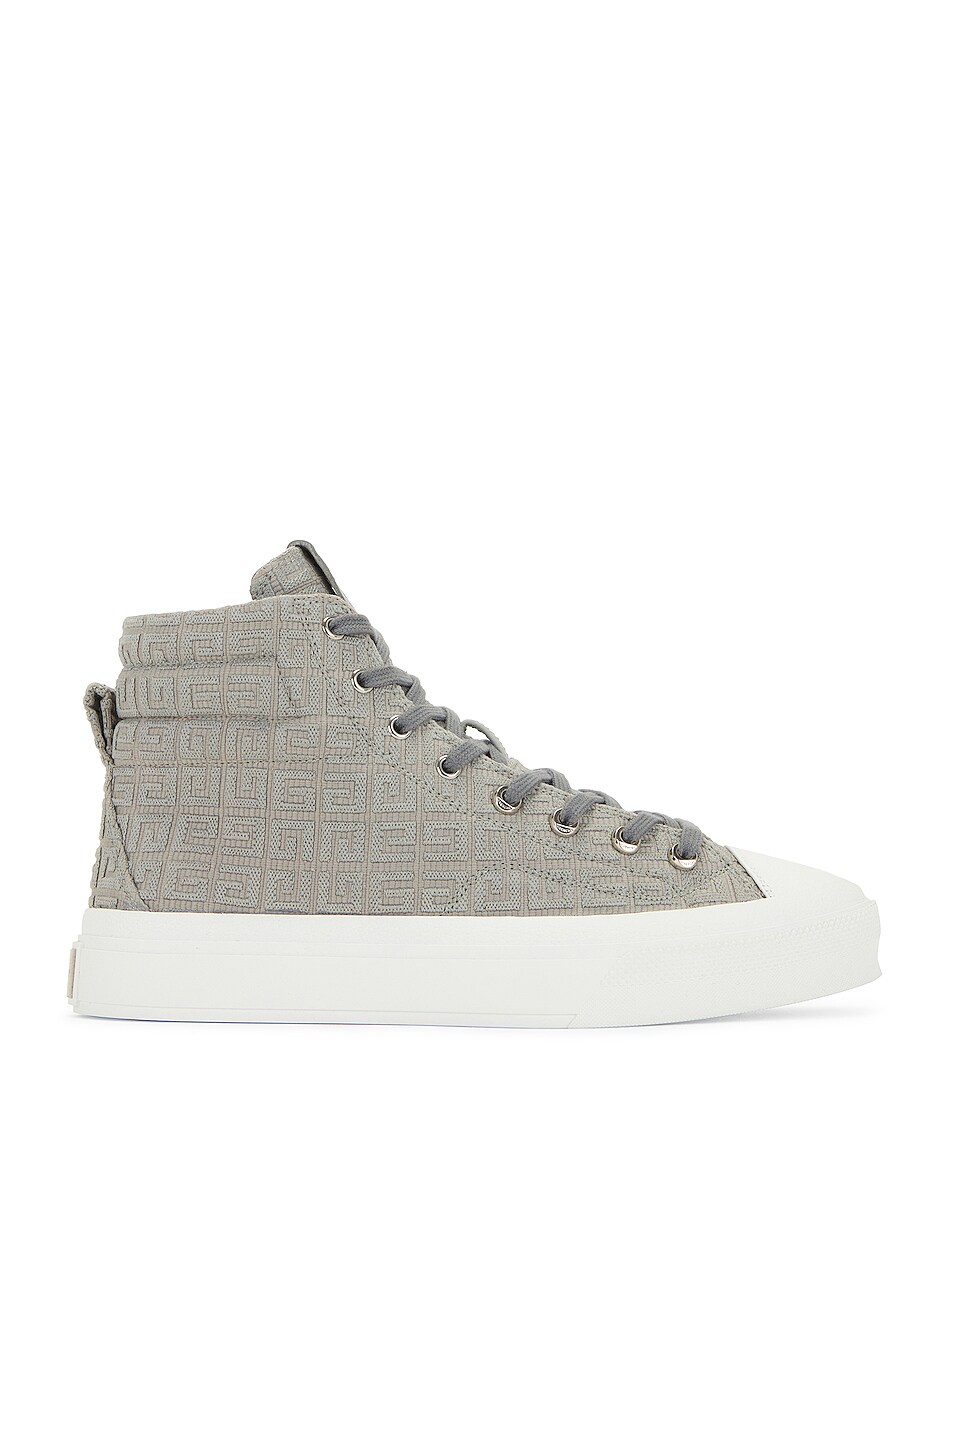 Image 1 of Givenchy City High Top Sneaker in Storm Grey